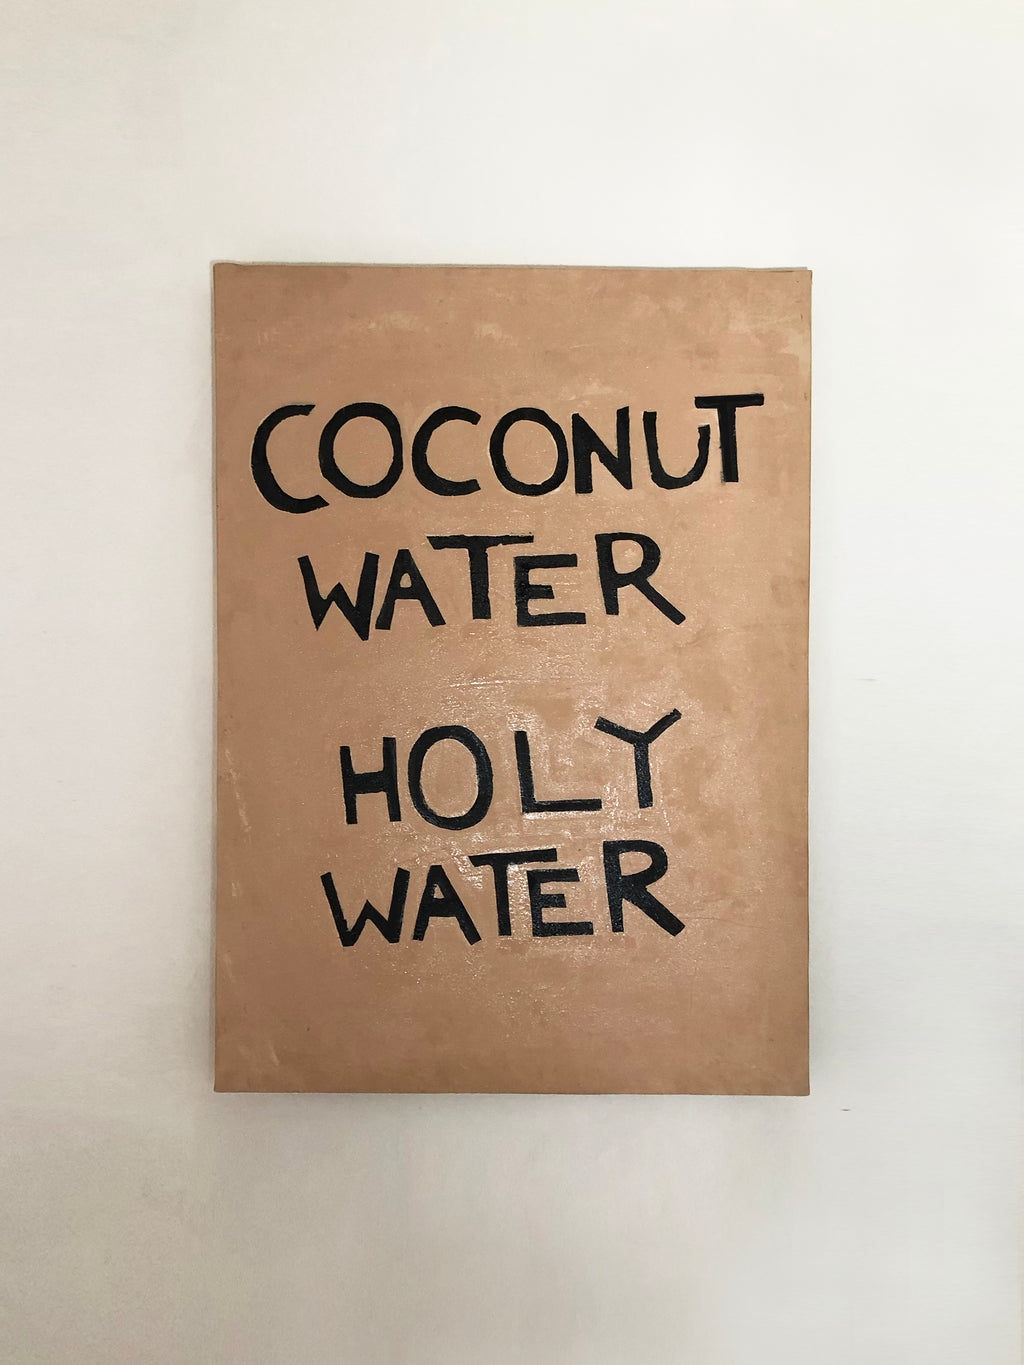 COCONUT WATER, HOLY WATER